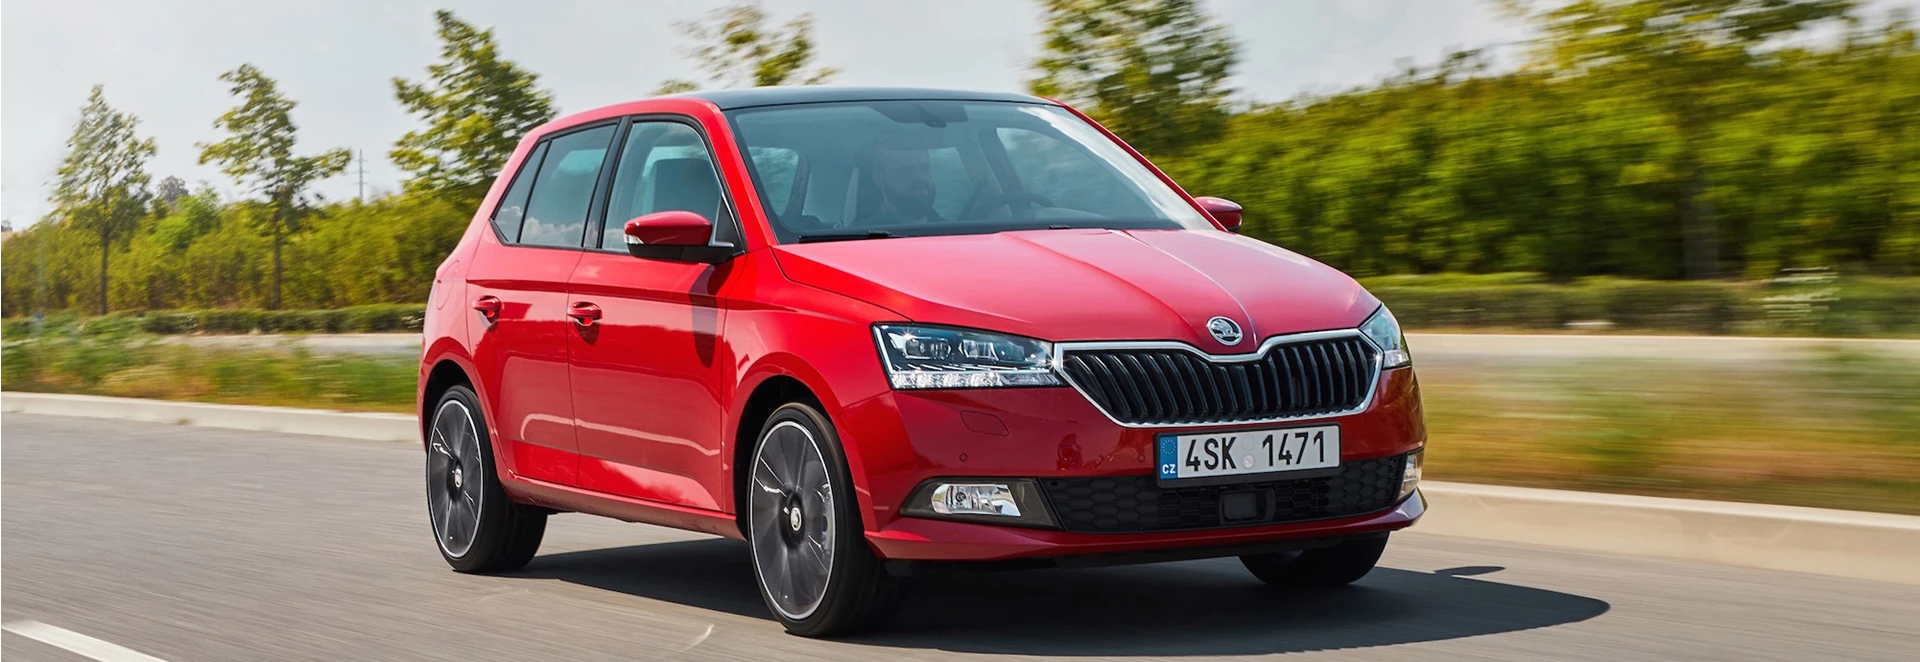 5 reasons why you should test drive the new 2019 Skoda Fabia 